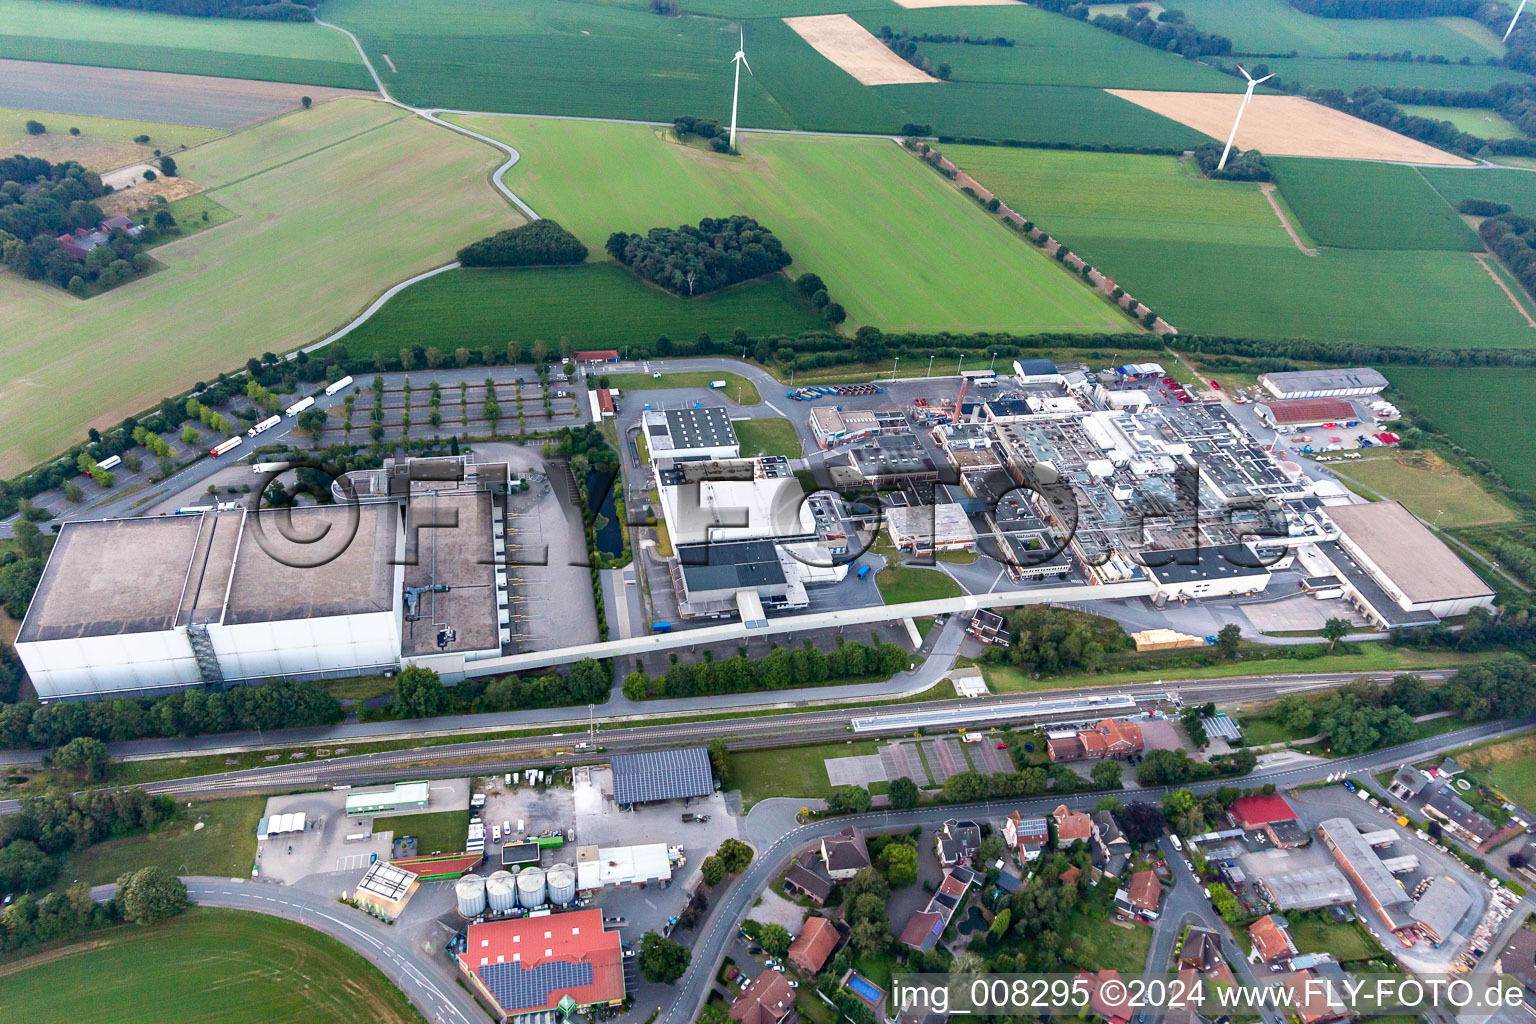 Buildings and production halls on the food manufacturer's premises IGLO GmbH in Reken in the state North Rhine-Westphalia, Germany